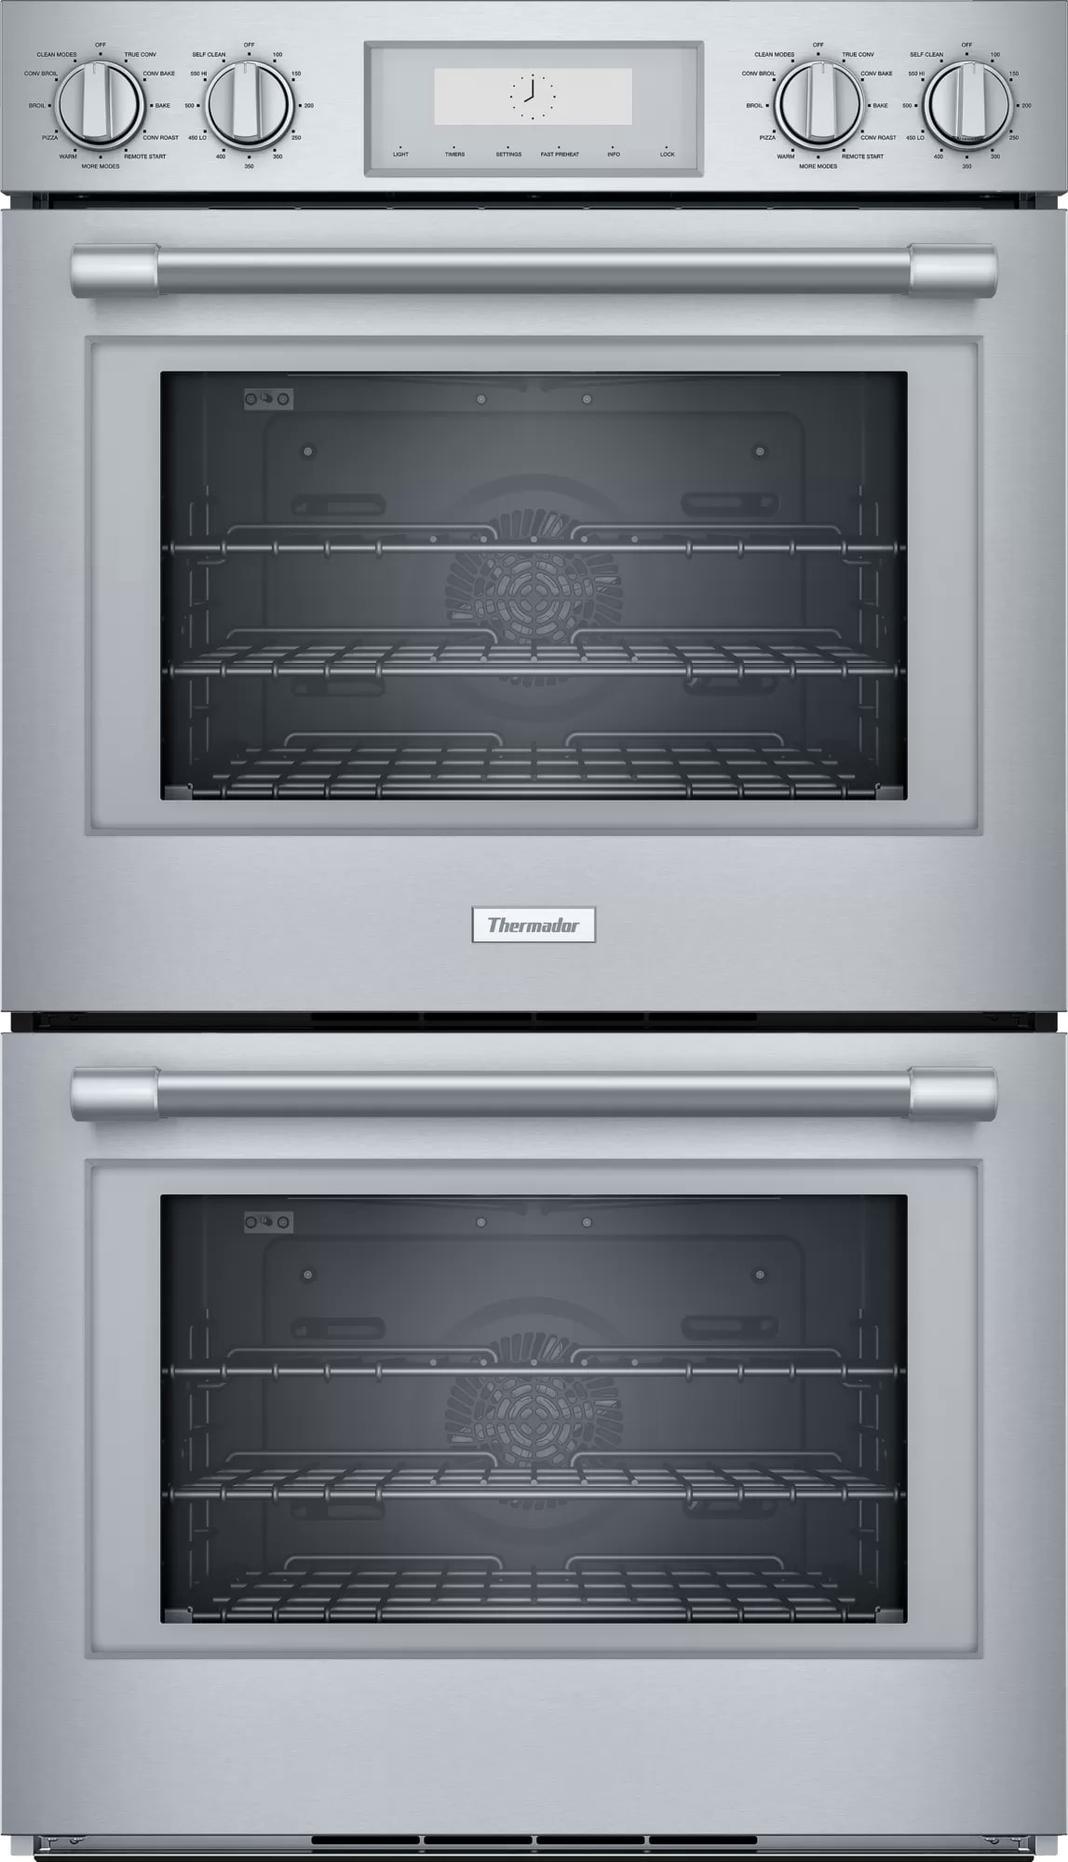 Thermador - 9 cu. ft Double Wall Oven in Stainless - PO302W